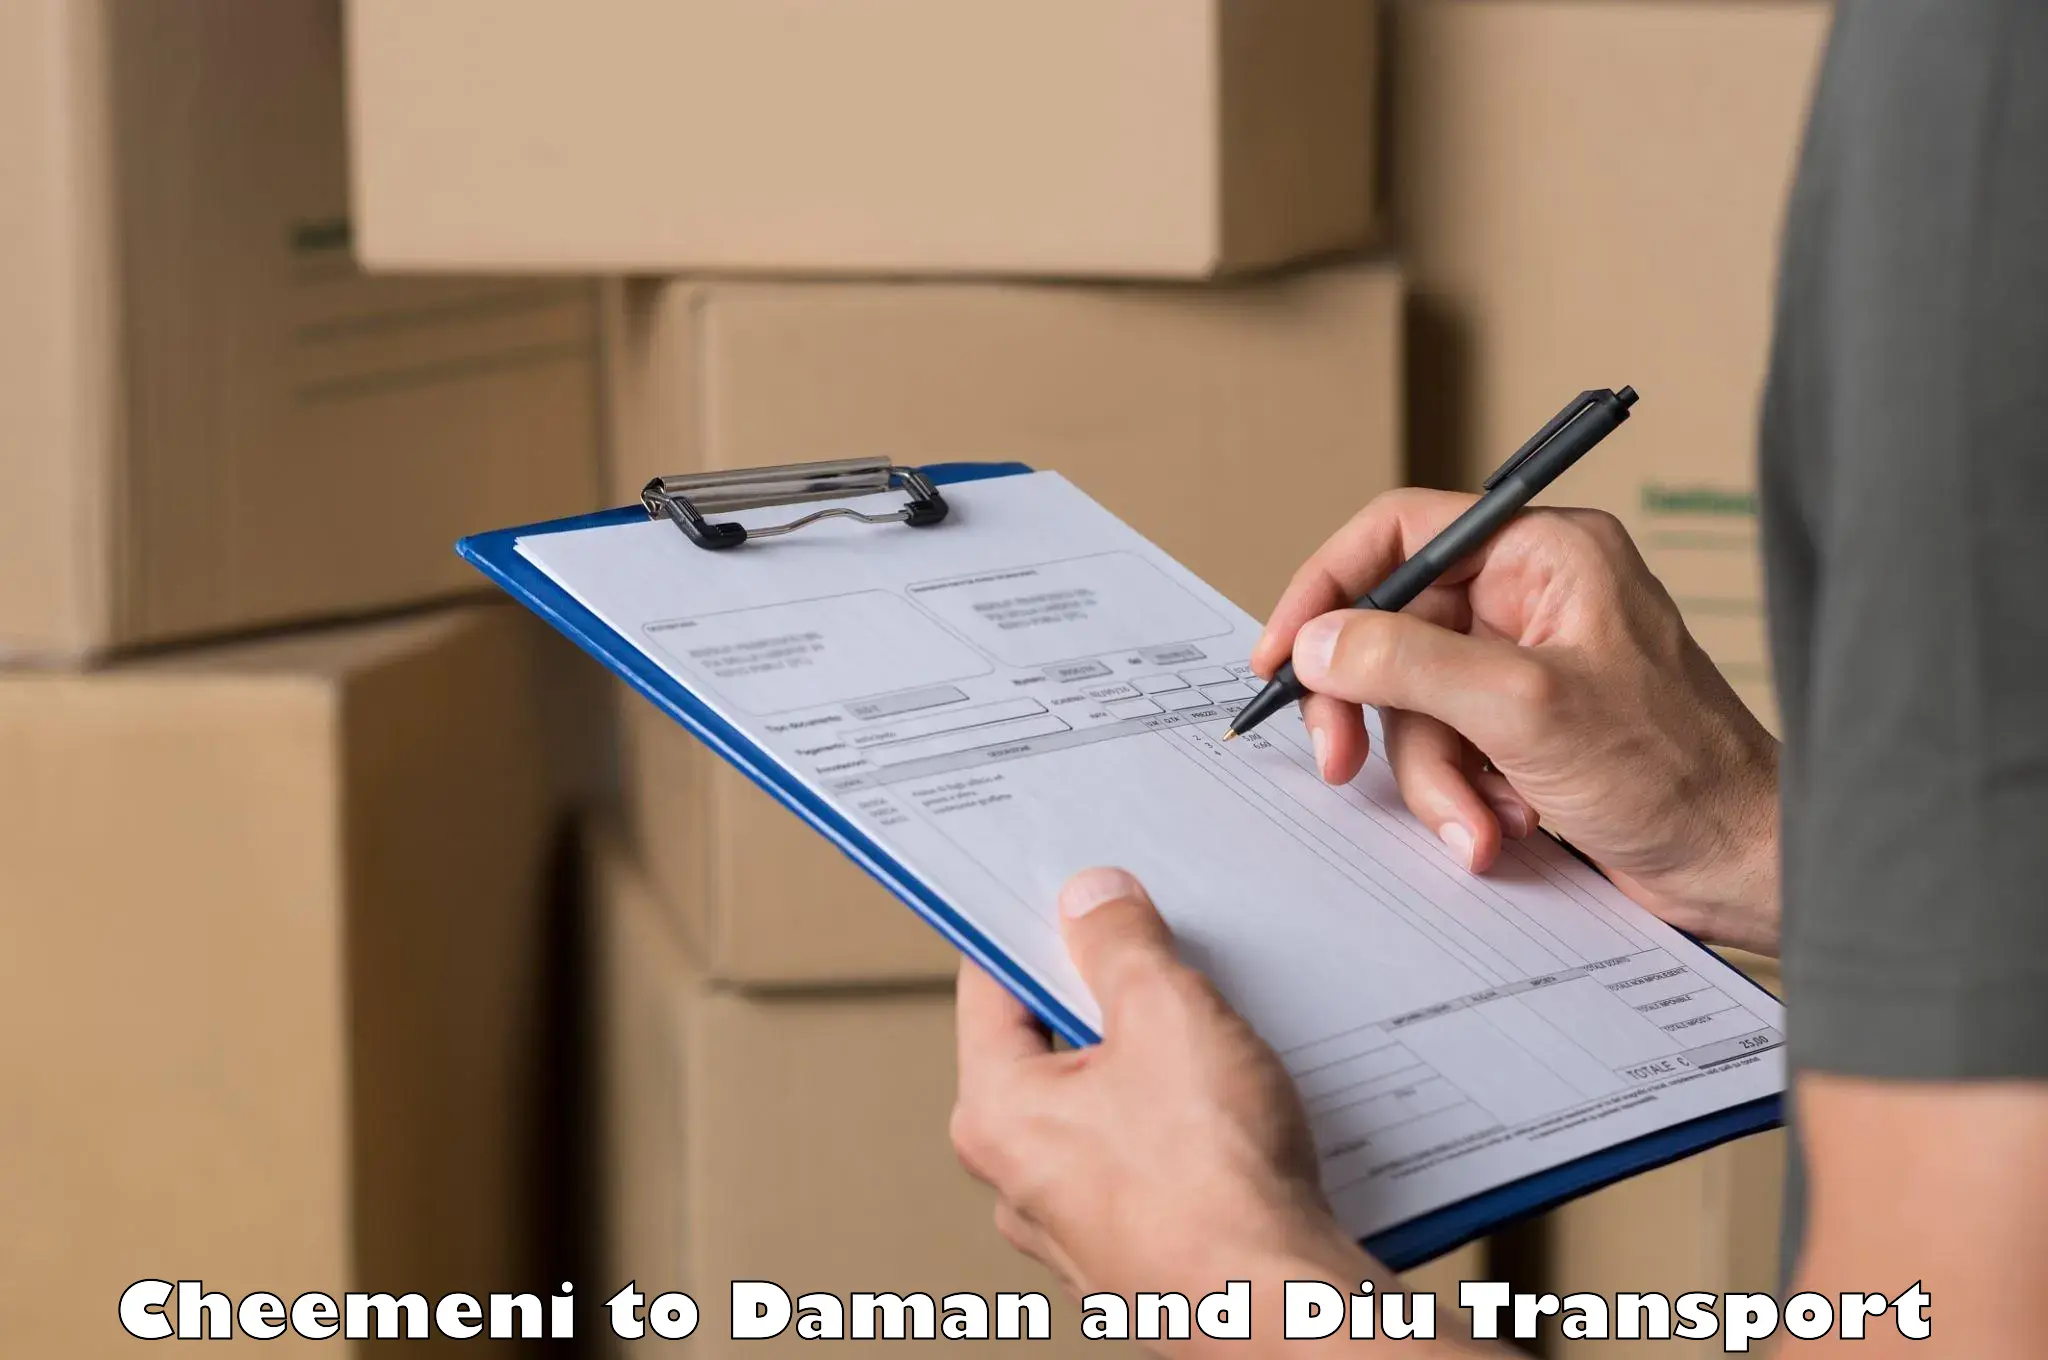 Container transport service Cheemeni to Daman and Diu